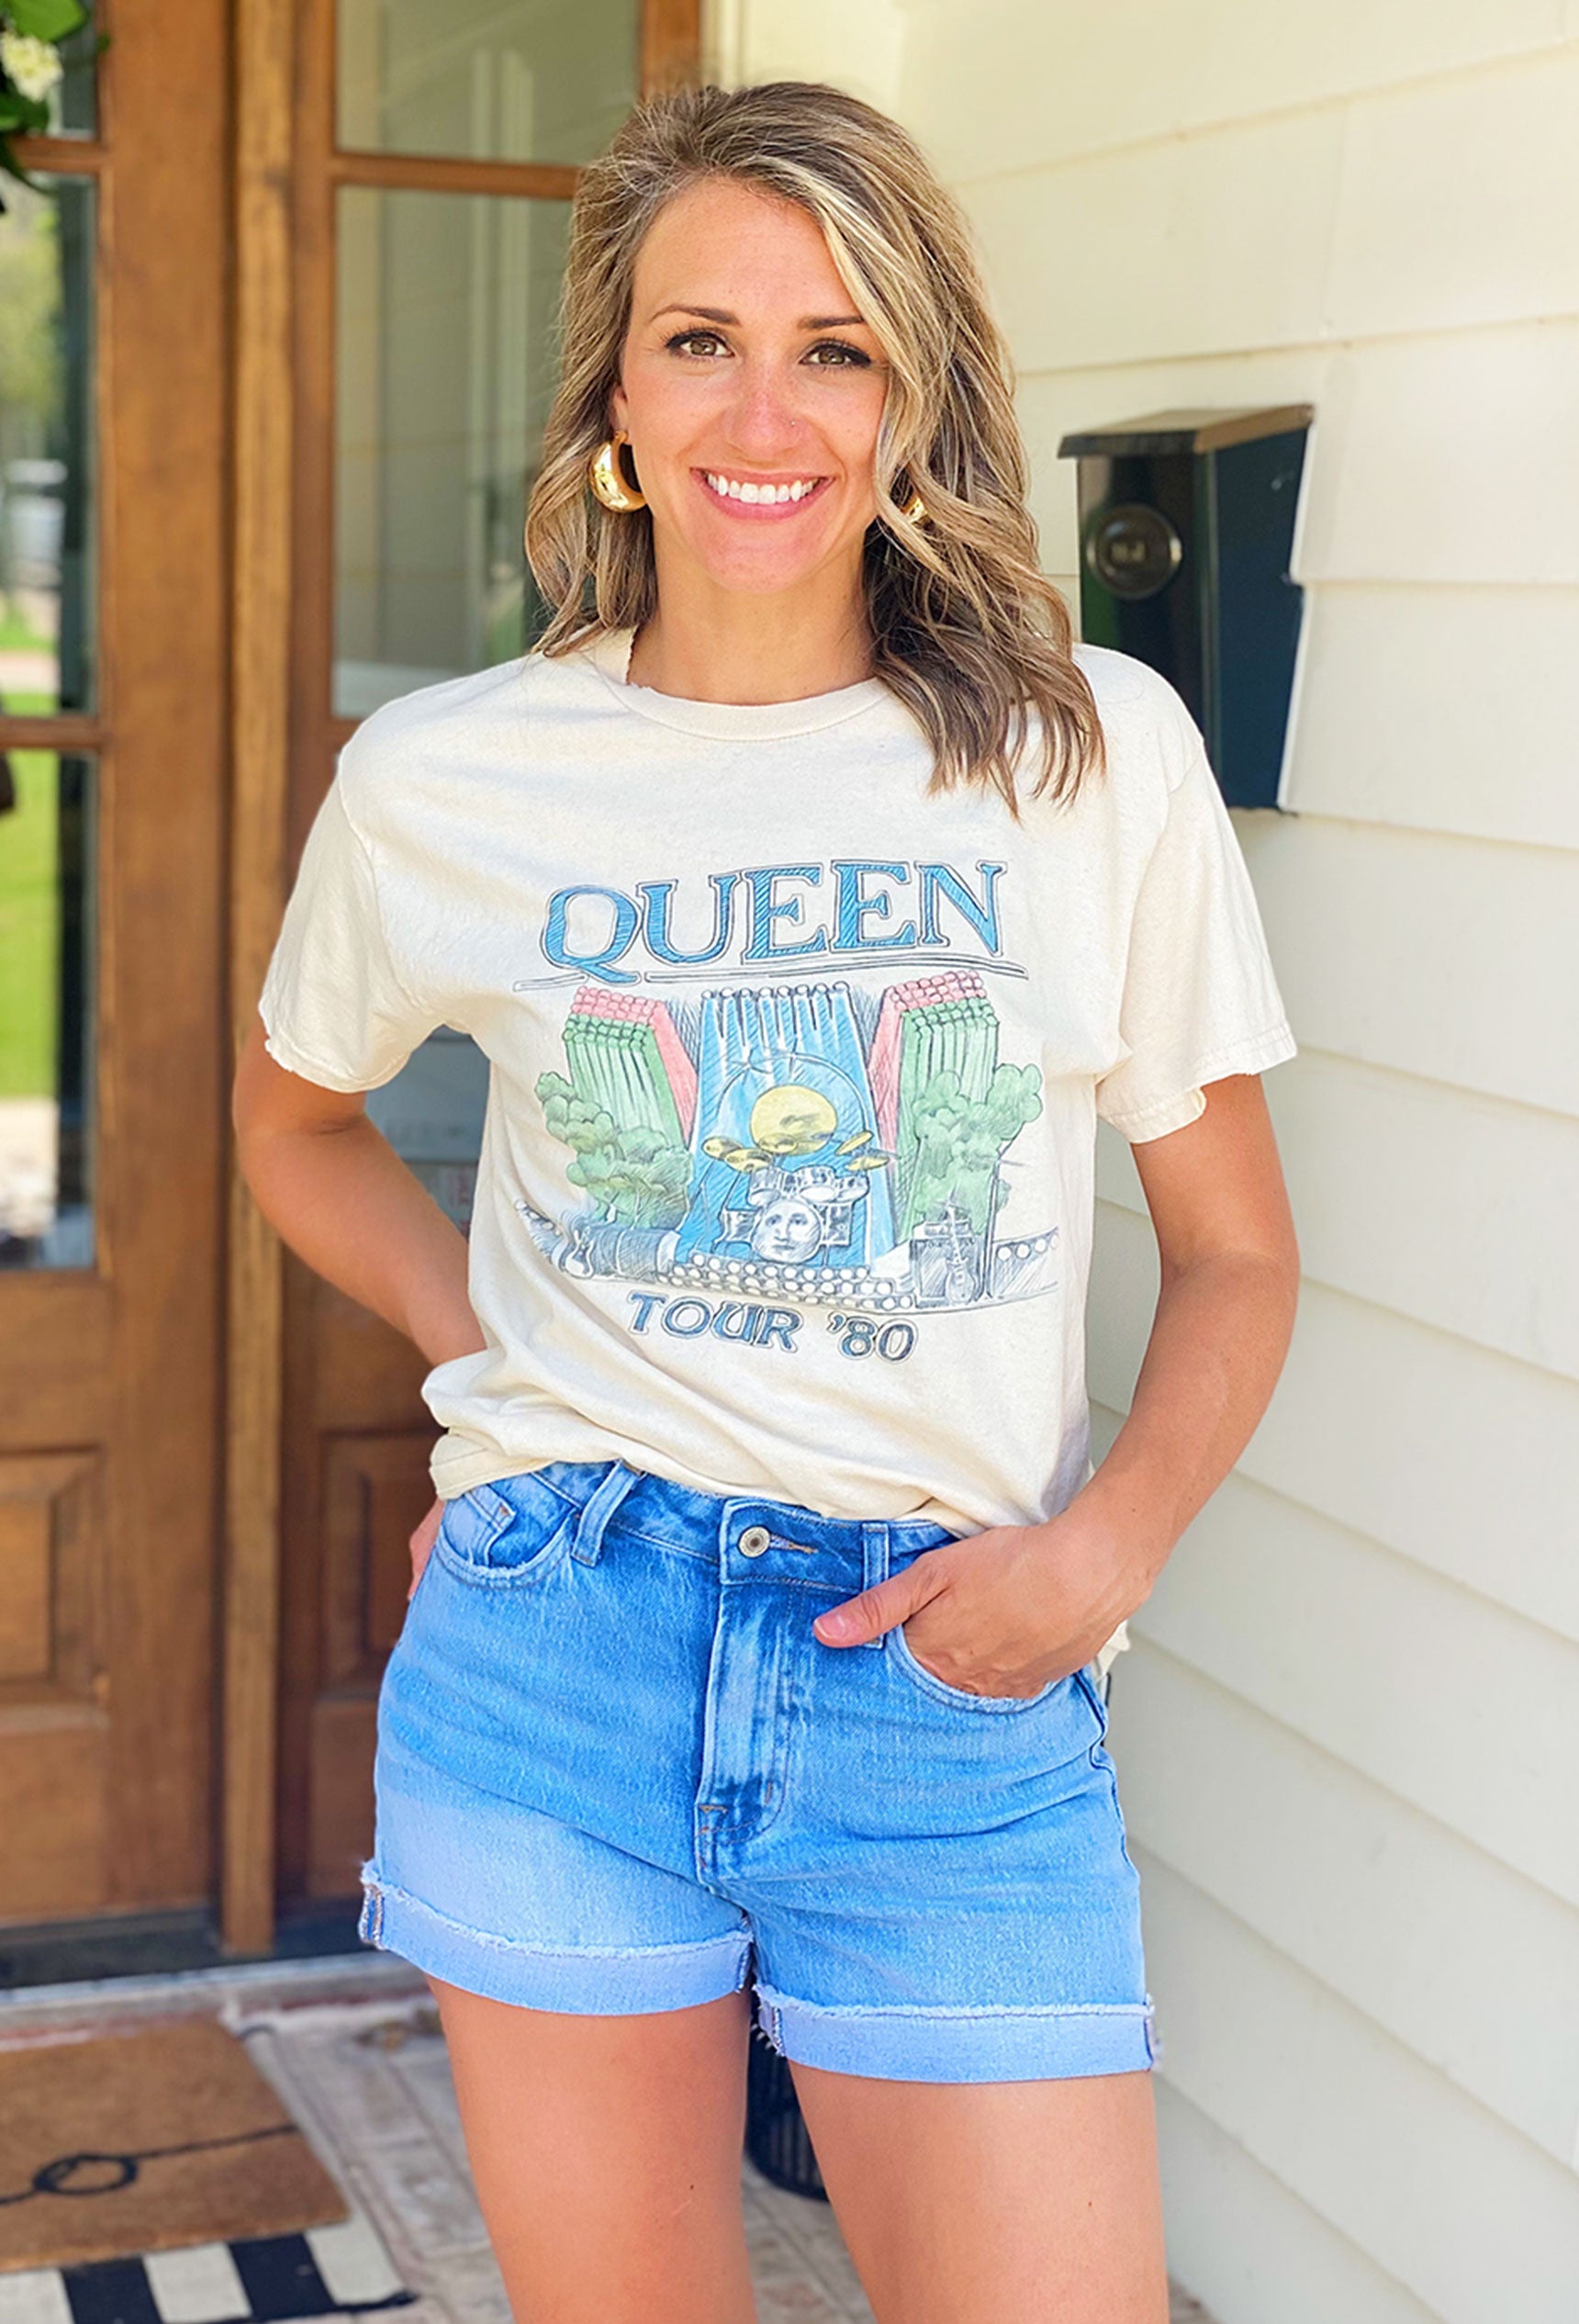 Queen Graphic Tee, neutral tee features the iconic "Queen Tour '80" logo and an on stage graphic